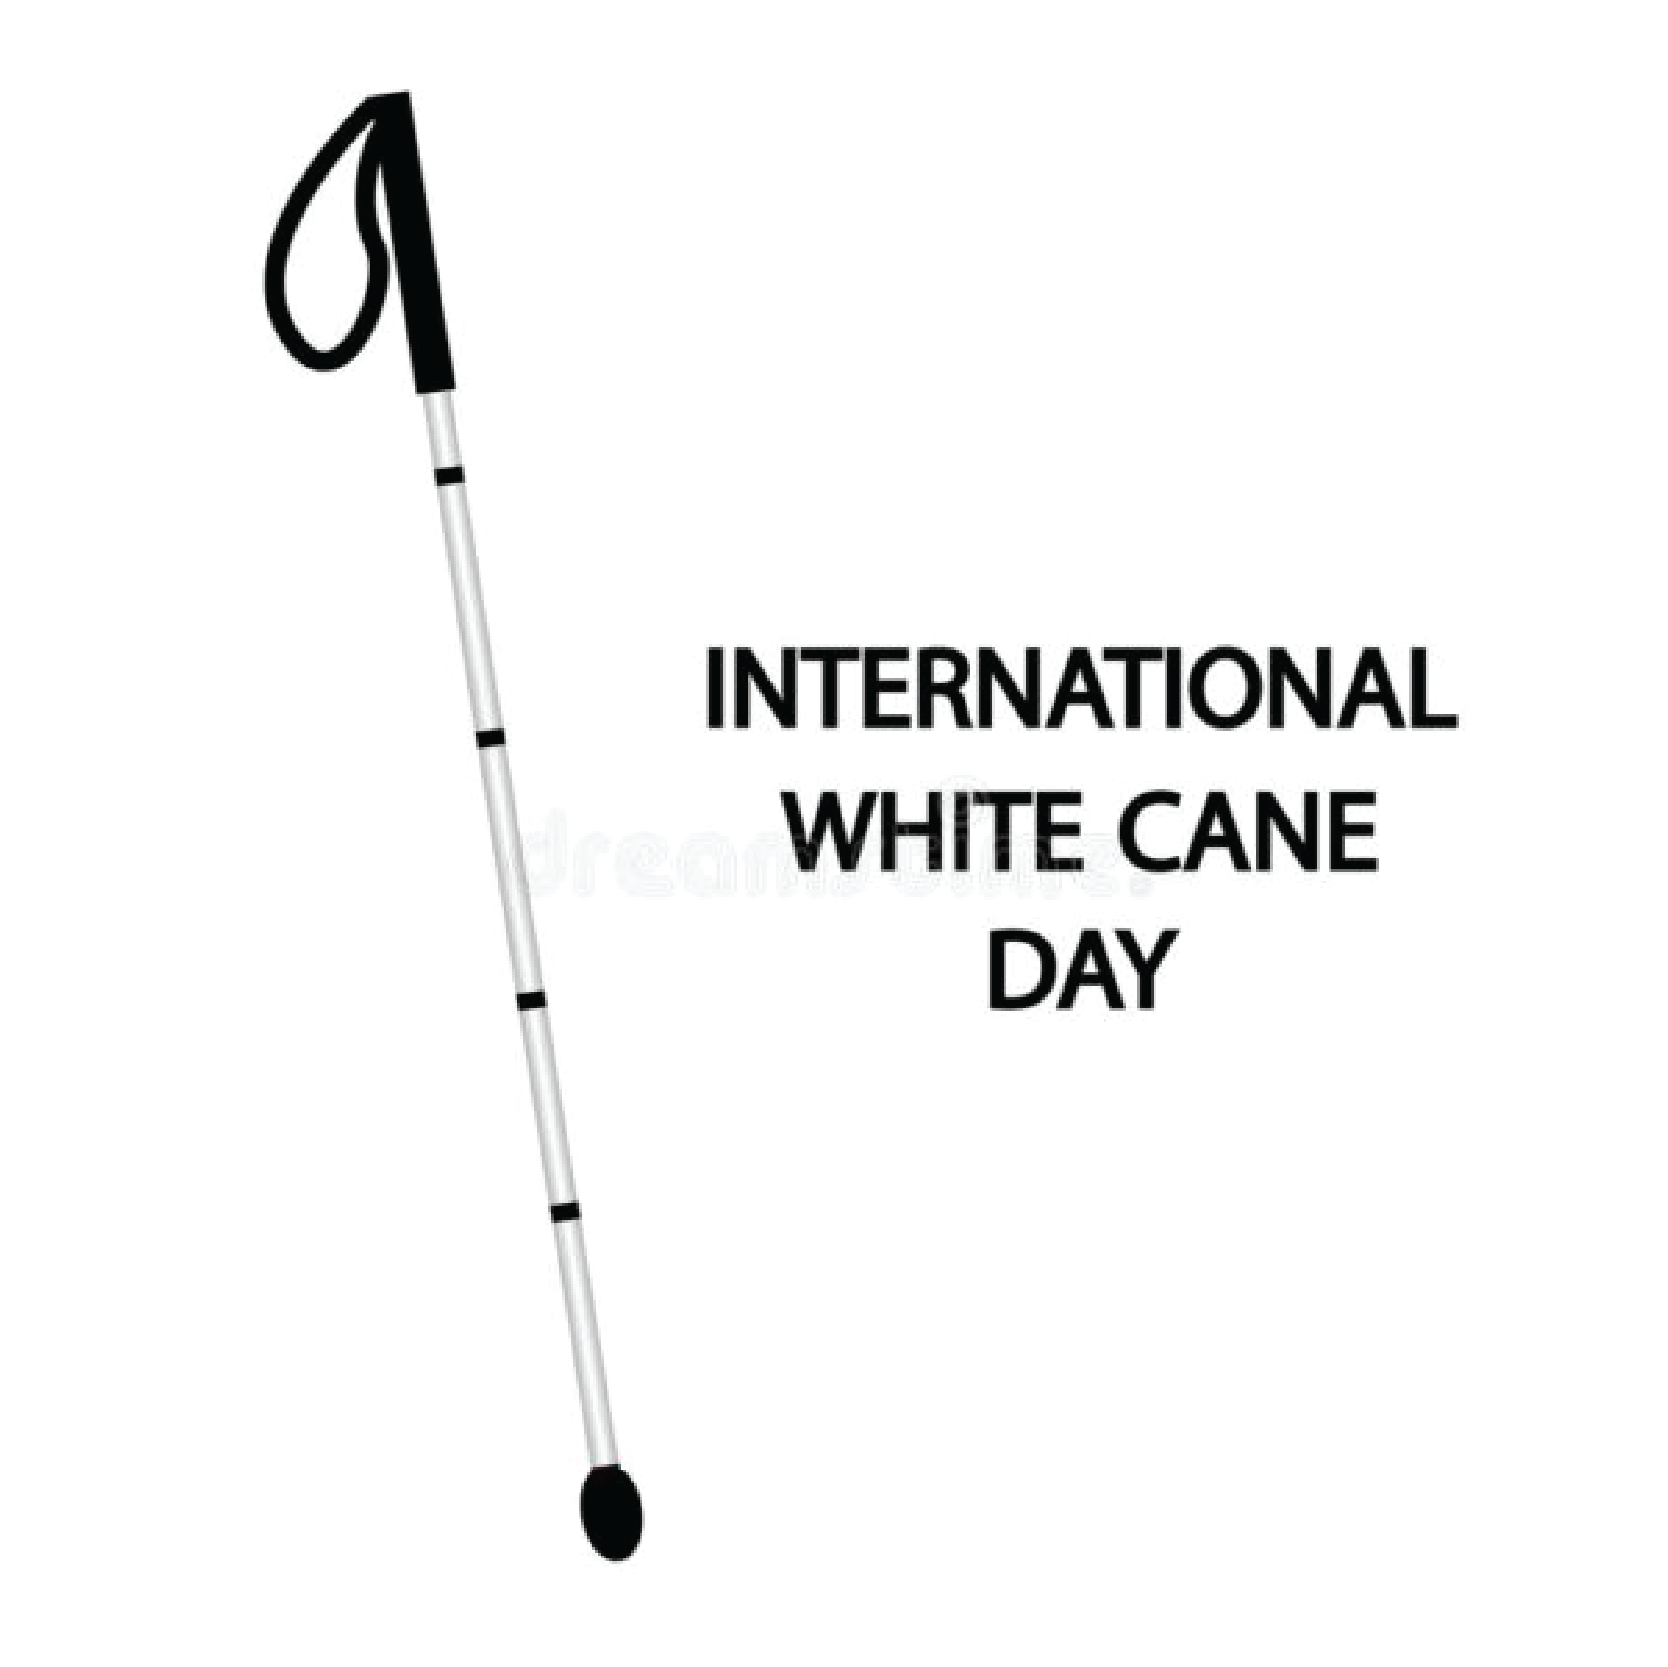 Image of white cane with words International White Cane Day around it.